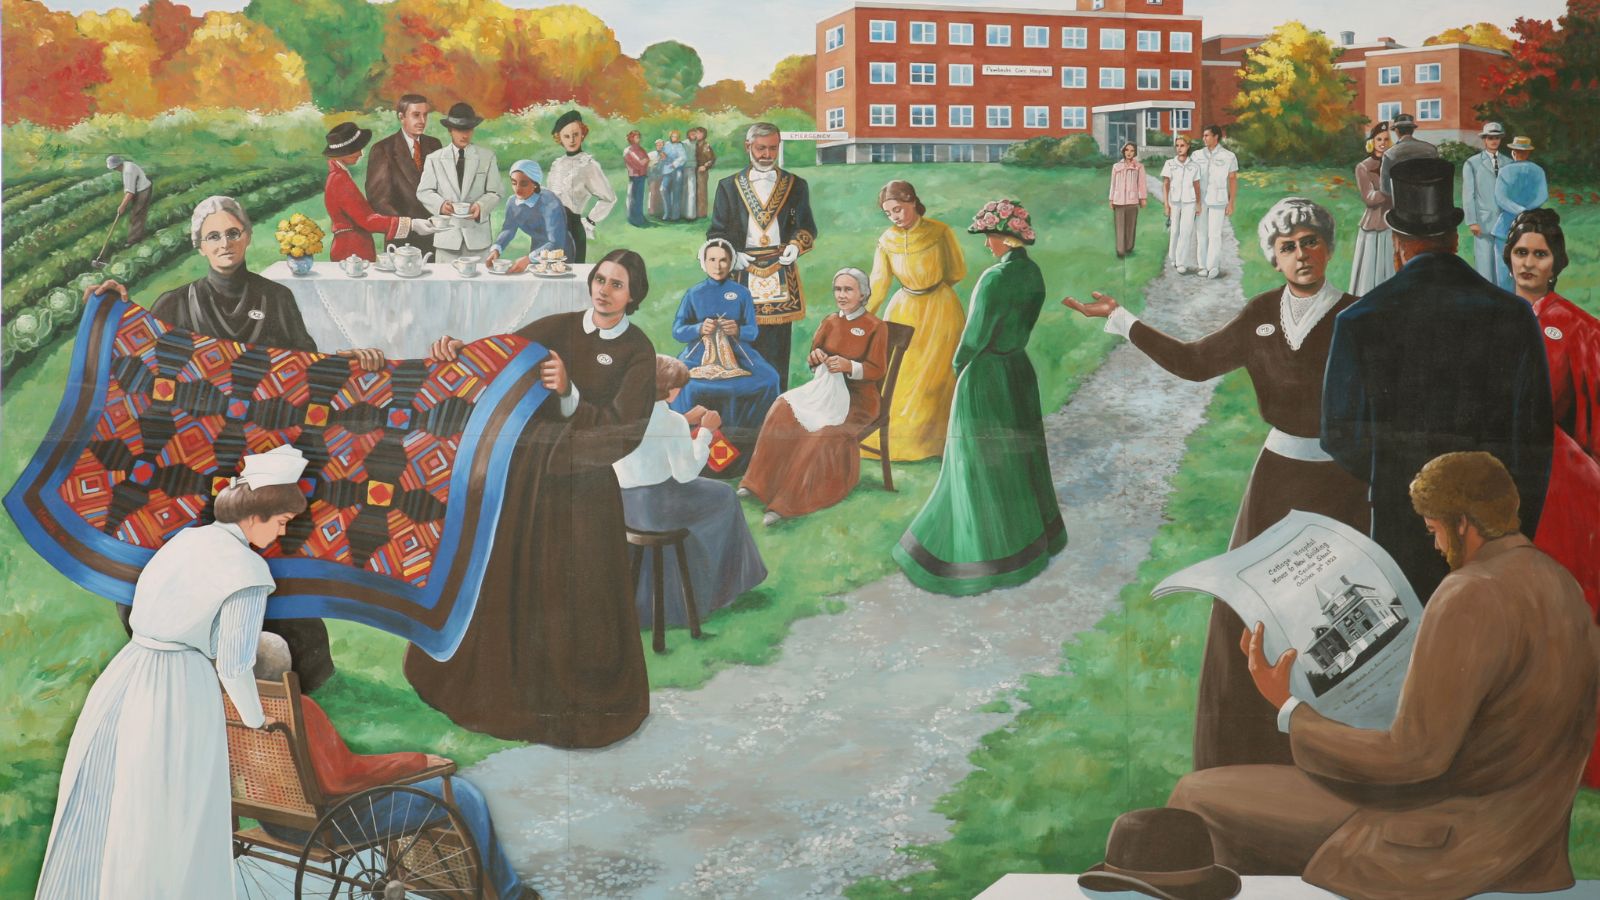 Photo of the A Century of Service mural.